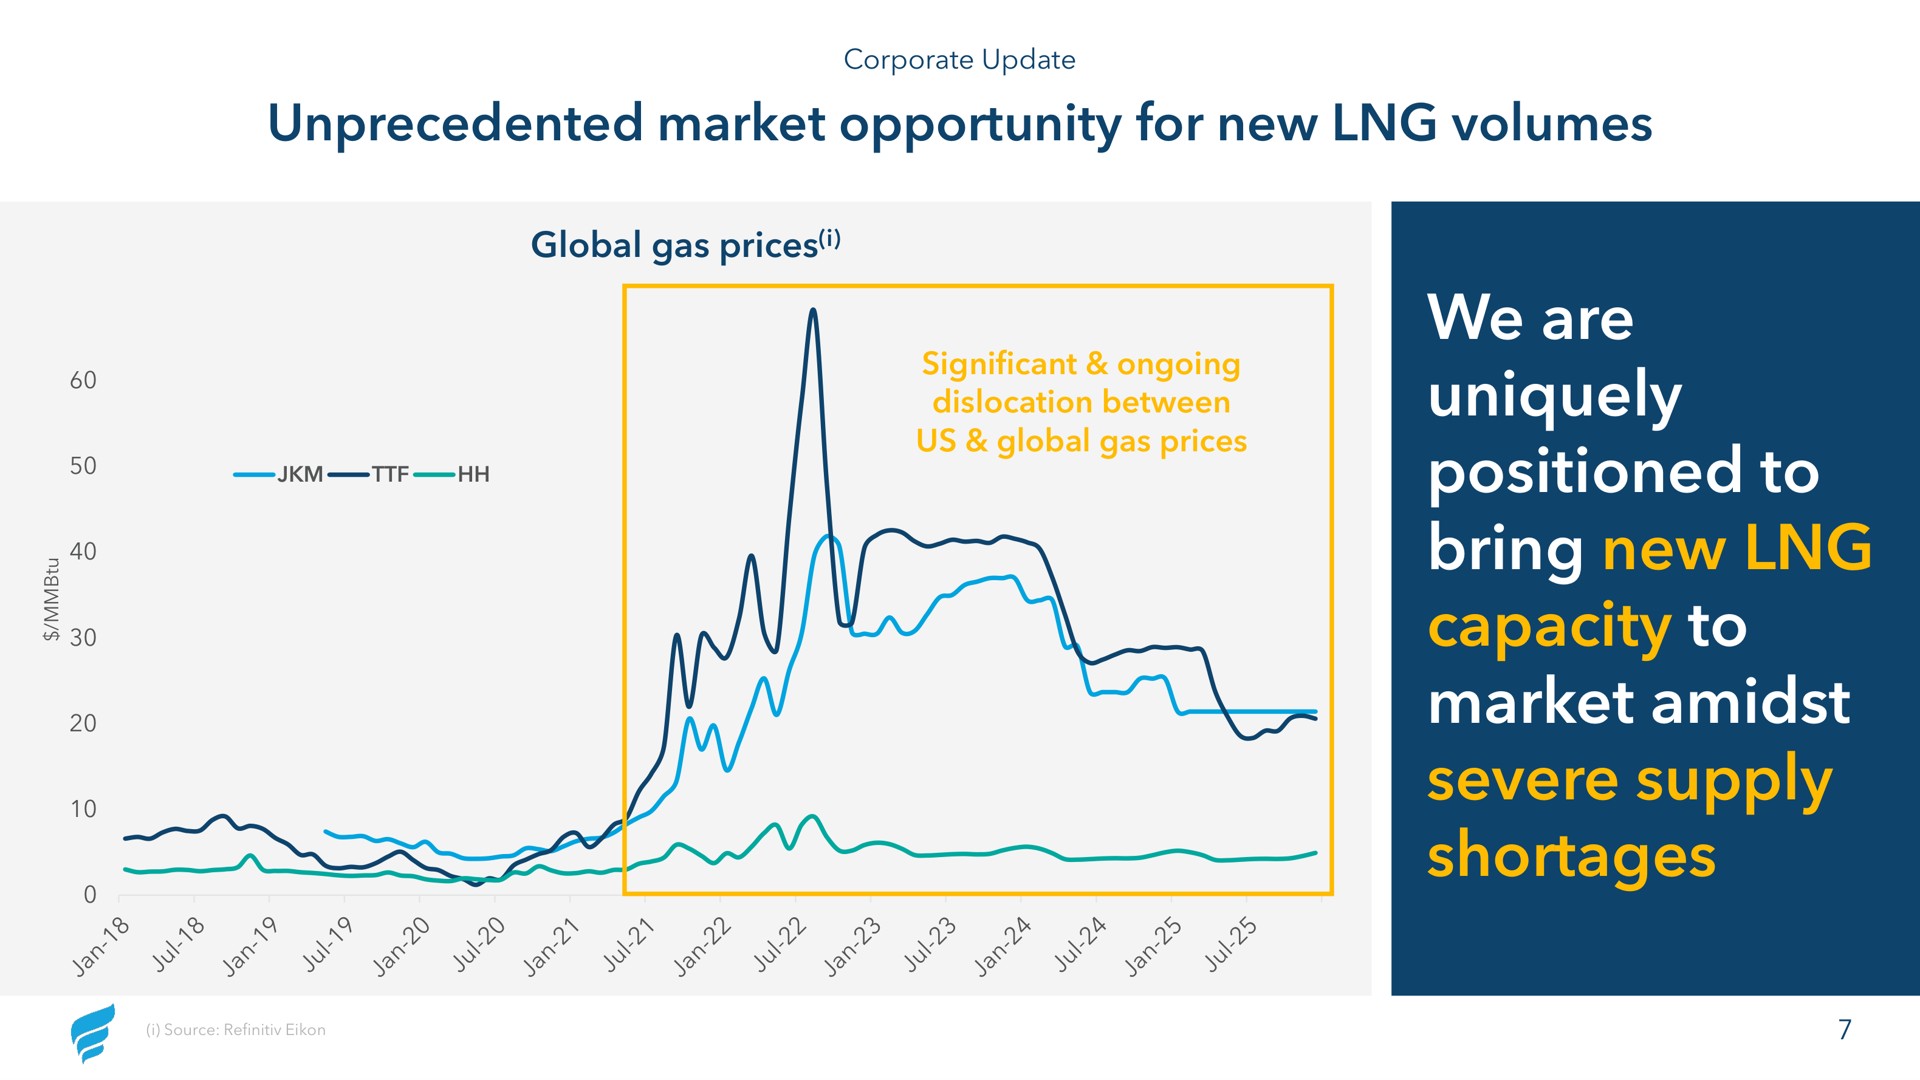 unprecedented market opportunity for new volumes we are uniquely positioned to bring new capacity to market amidst severe supply shortages awe | NewFortress Energy